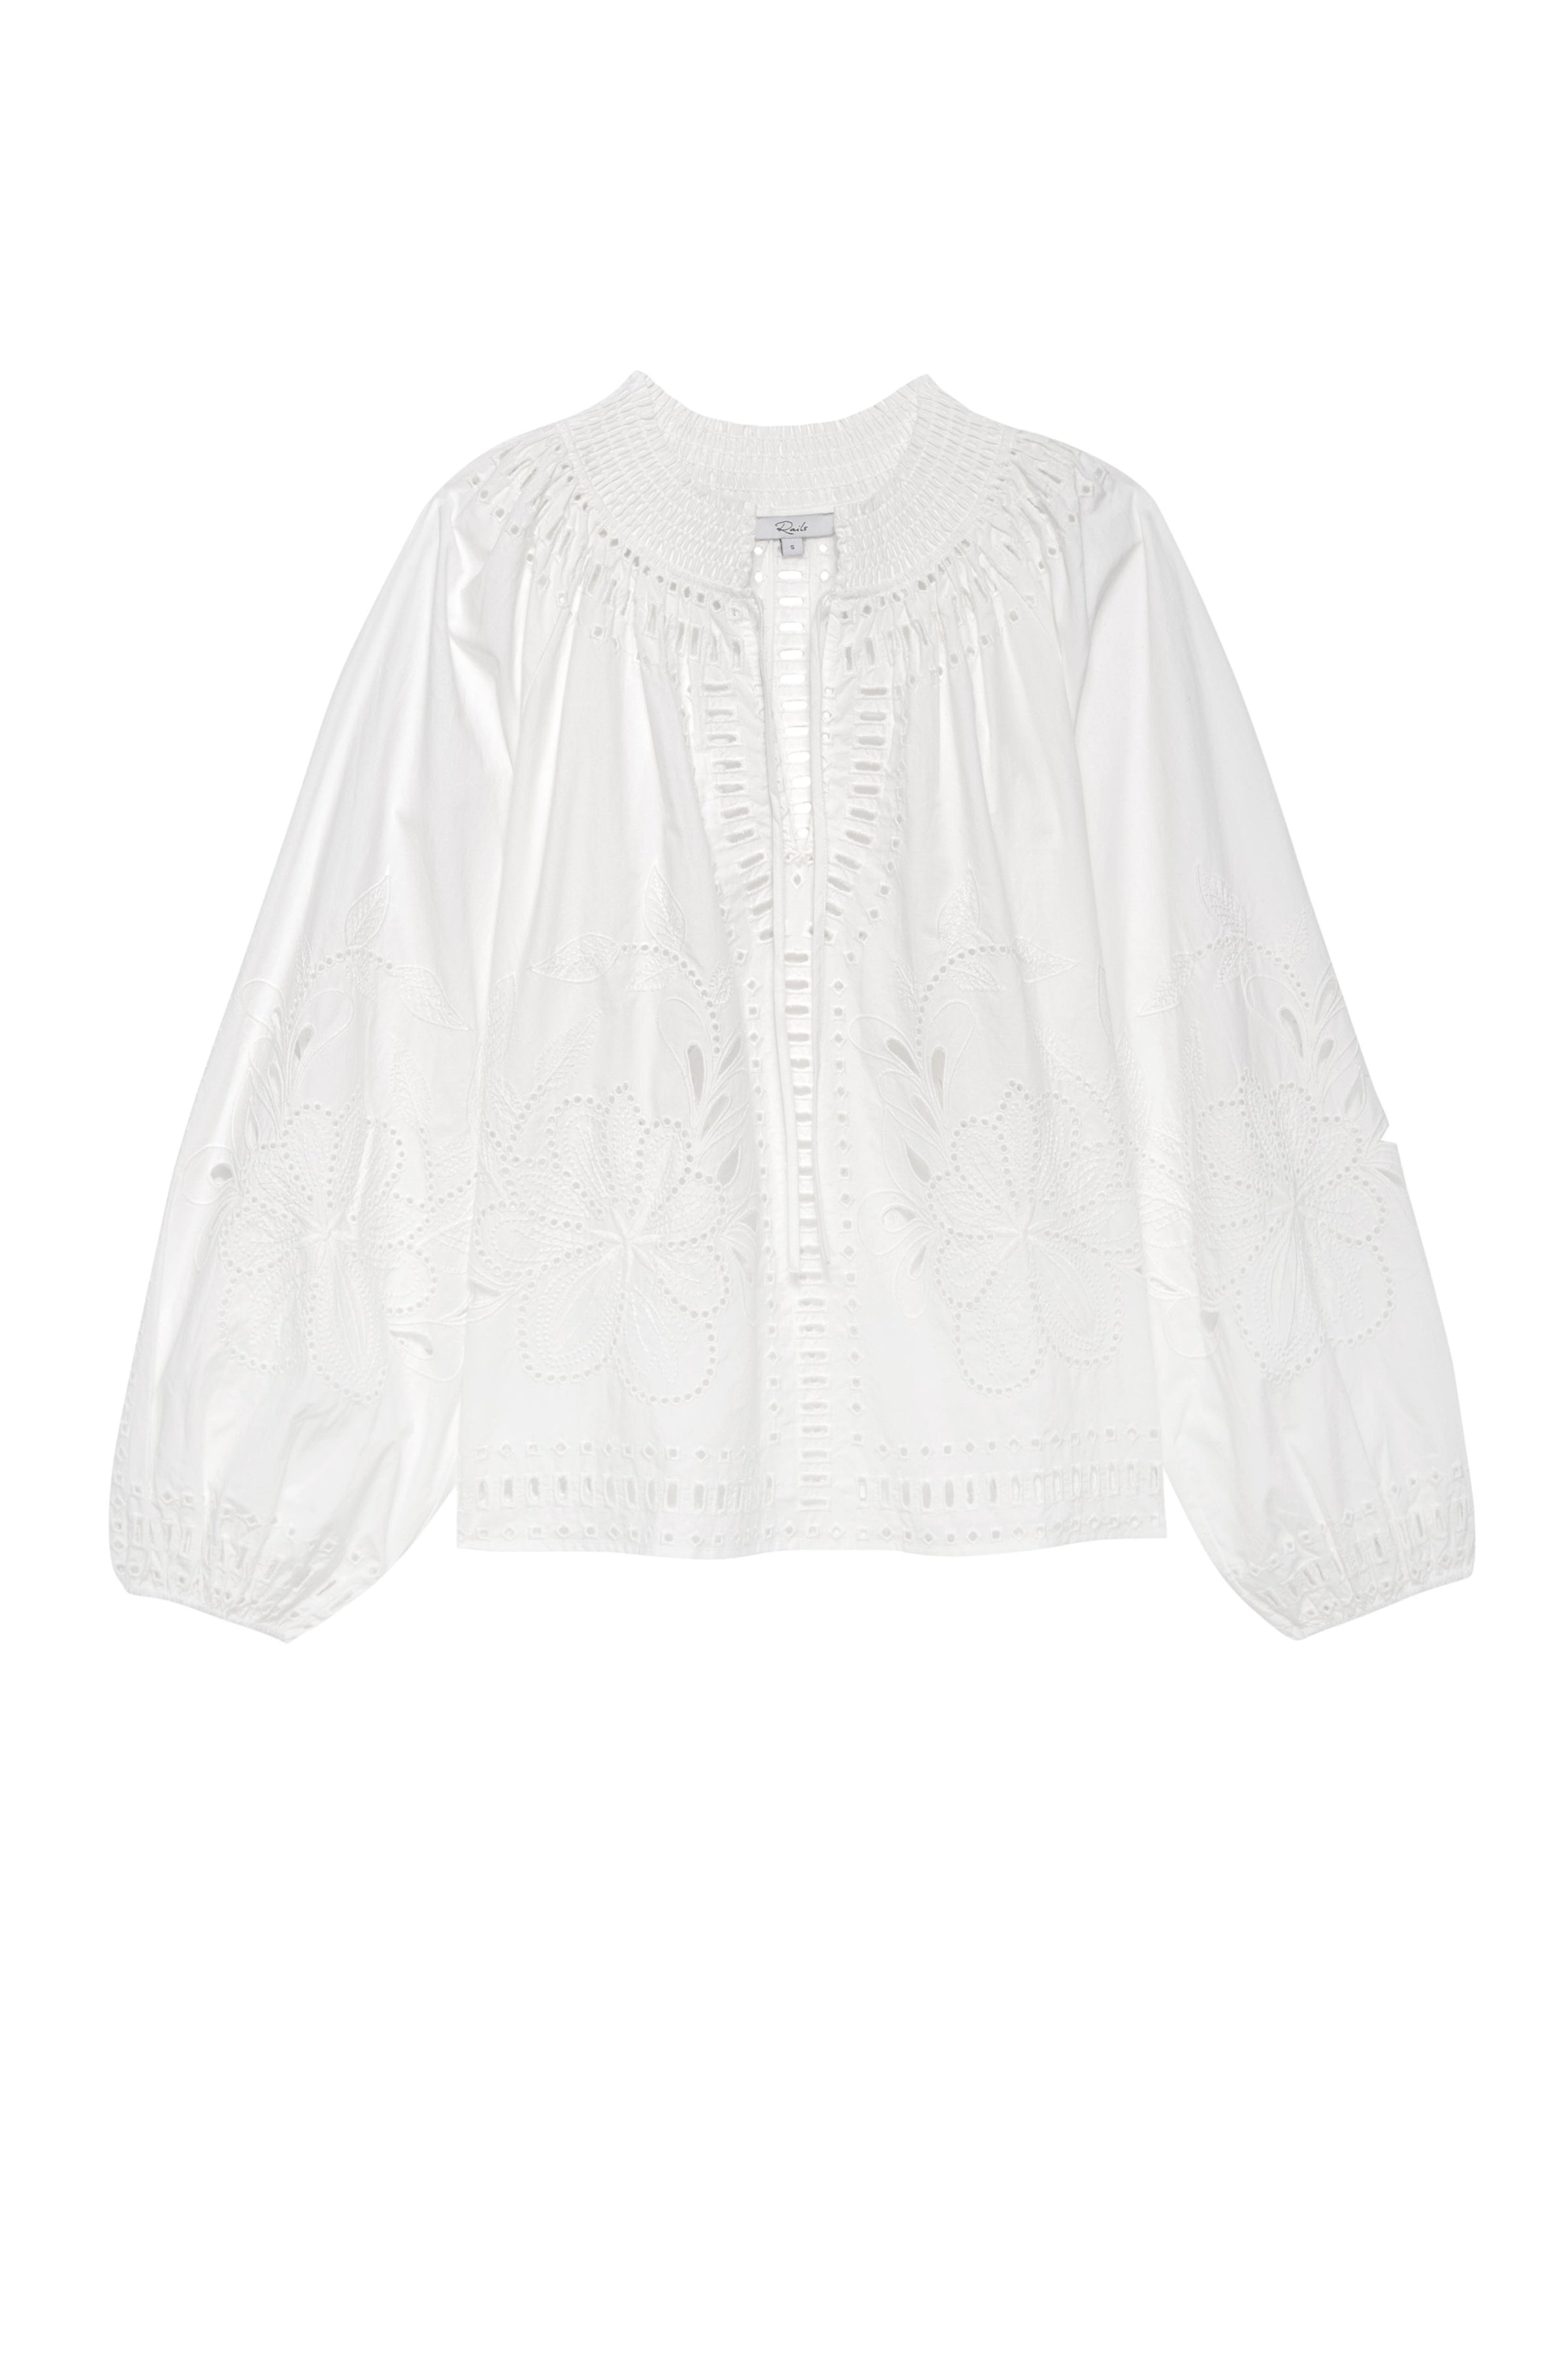 White Broderie anglais and embroidery top with notch neckline and tie with long sleeves and elasticated cuffs